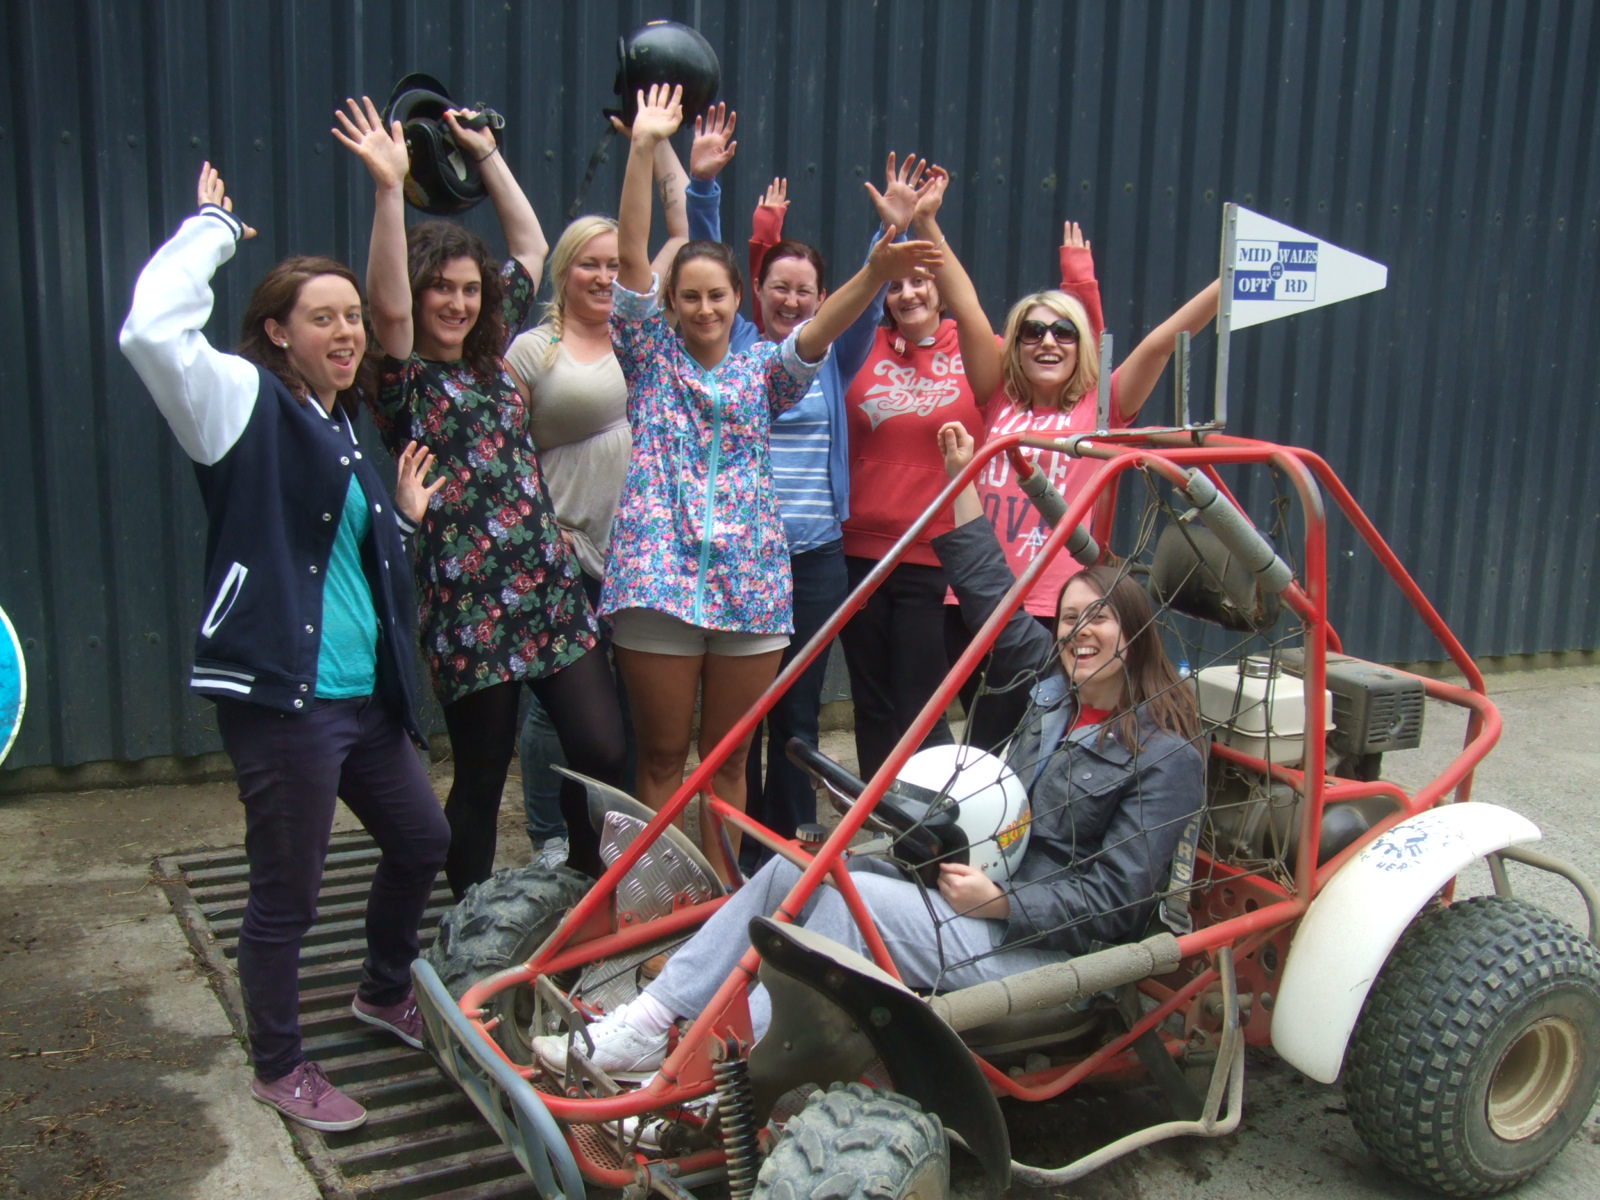 Rebeca and the Hens enjoying a Hen Party at Mid Wales Off Road